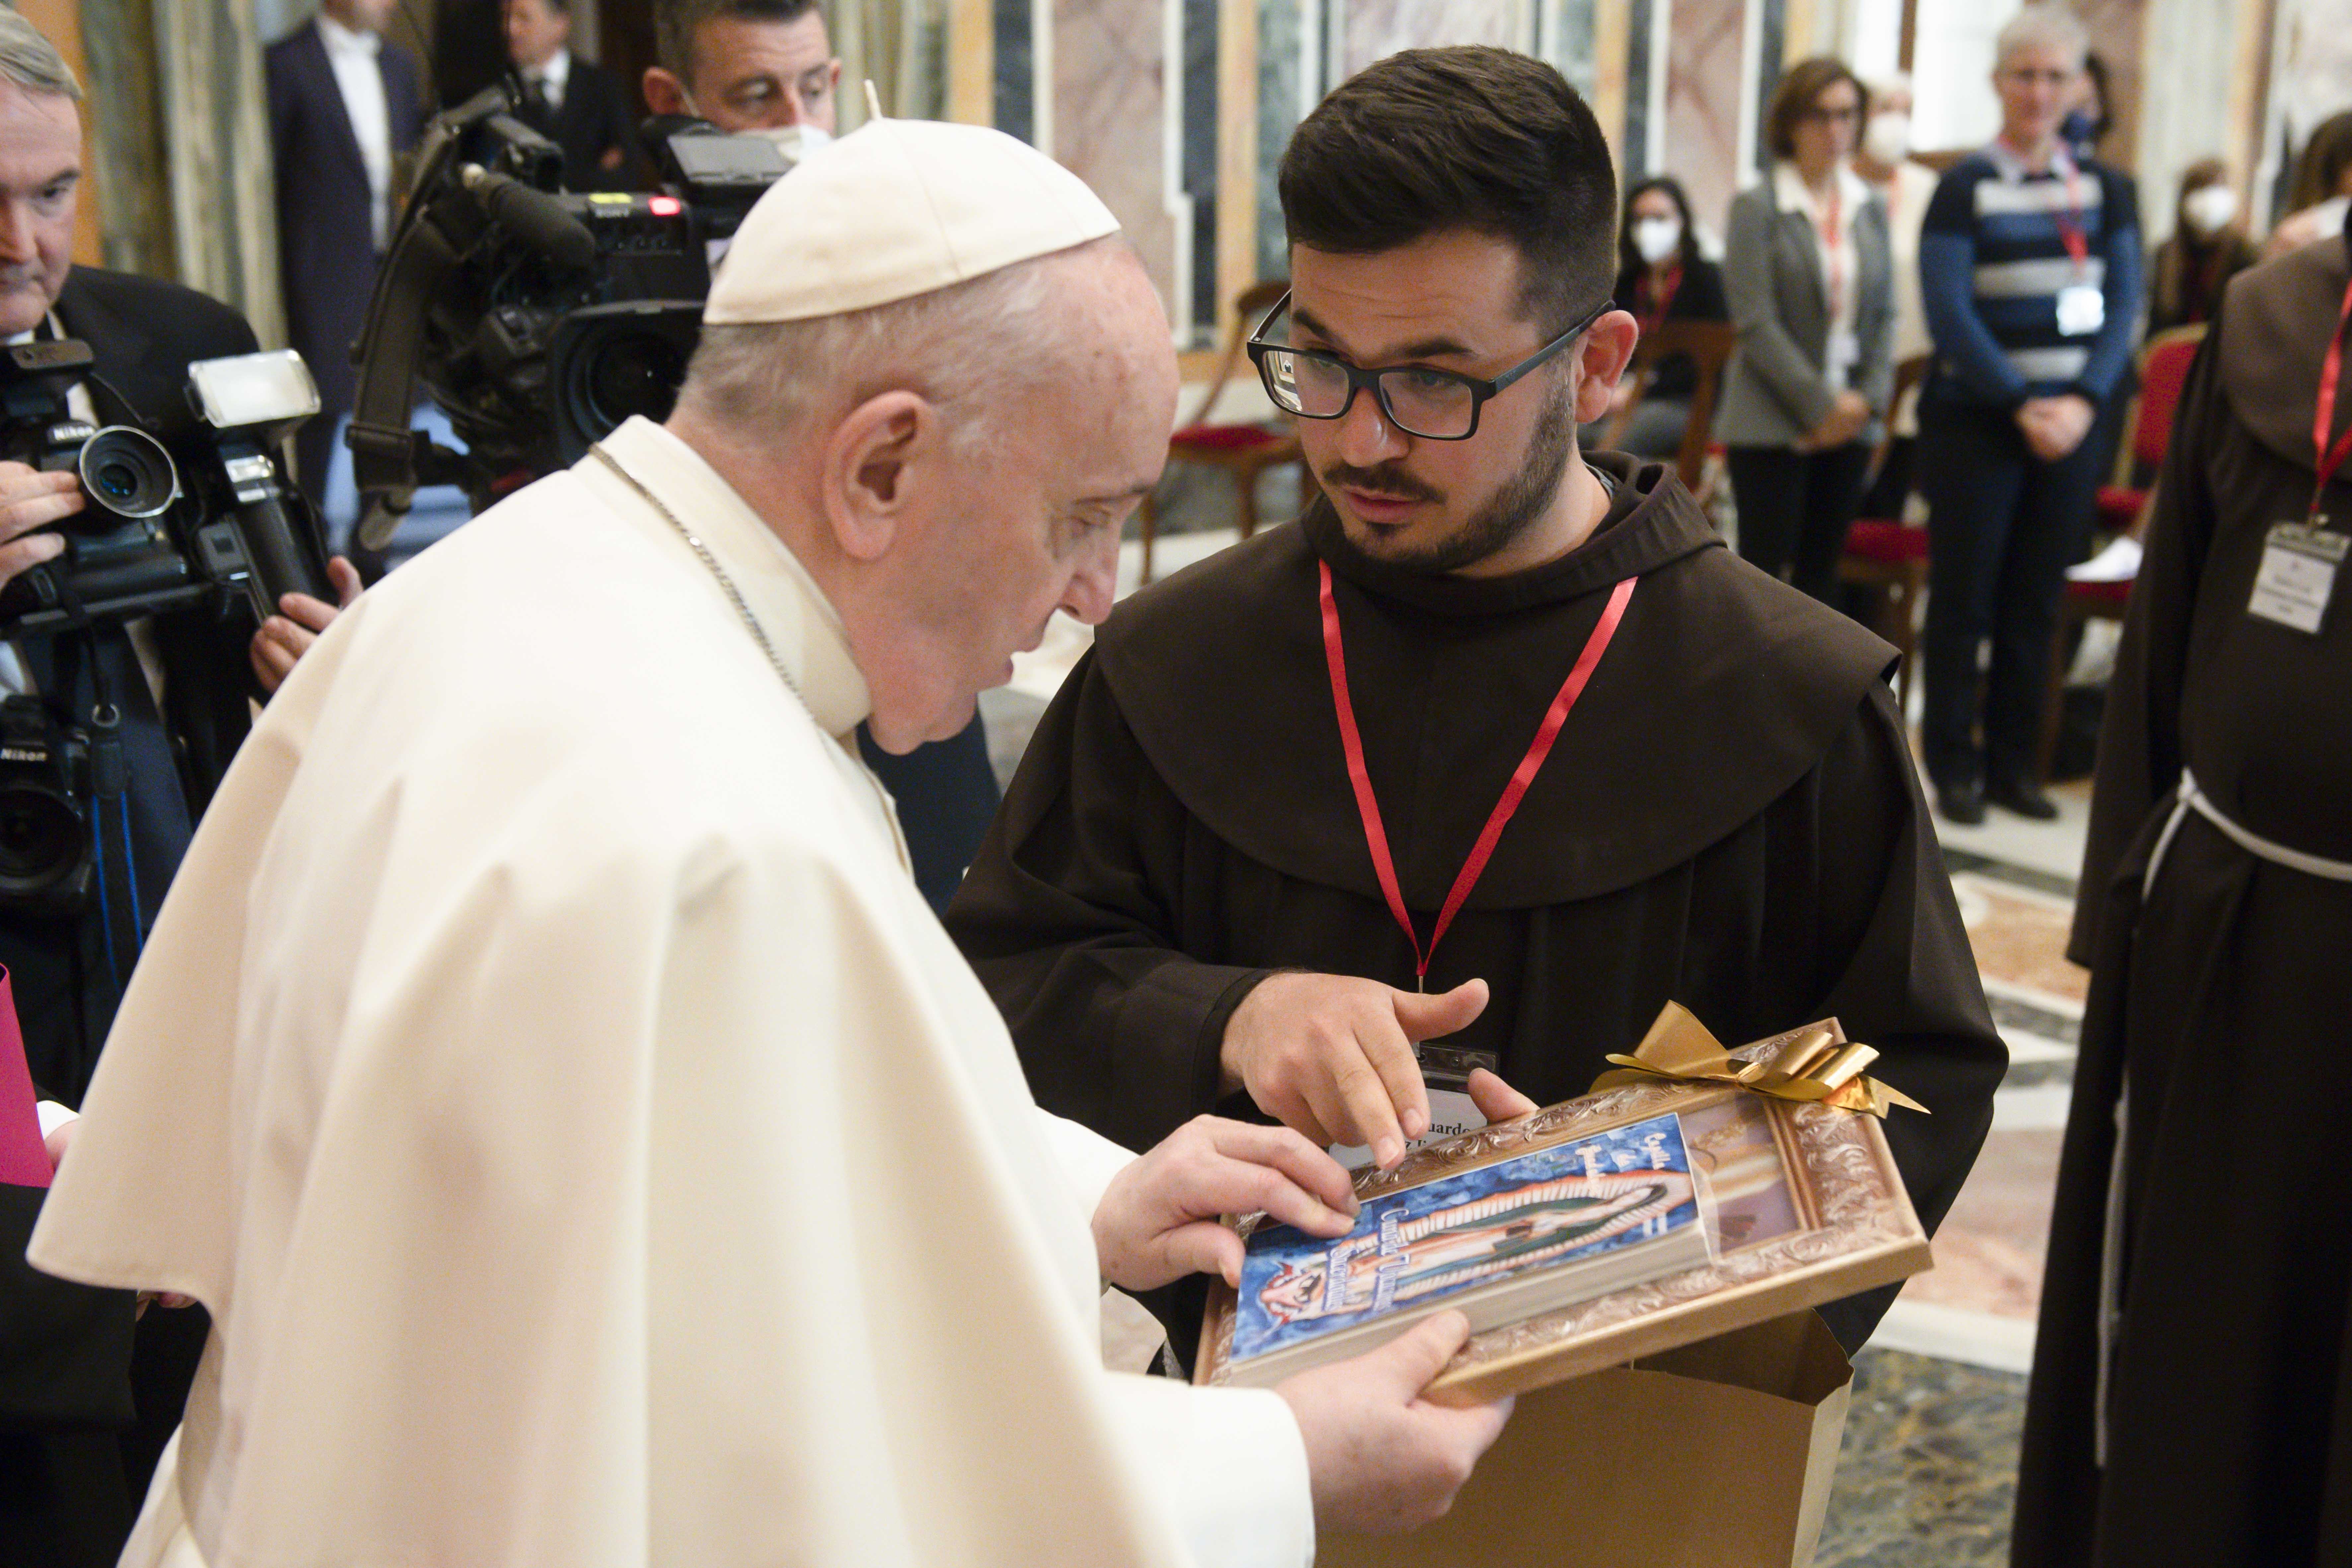 Pope Francis accepts a gift from a Franciscan friar during an audience with a delegation of communicators from the Custody of the Holy Land at the Vatican Jan. 17, 2022. (CNS photo/Vatican Media)